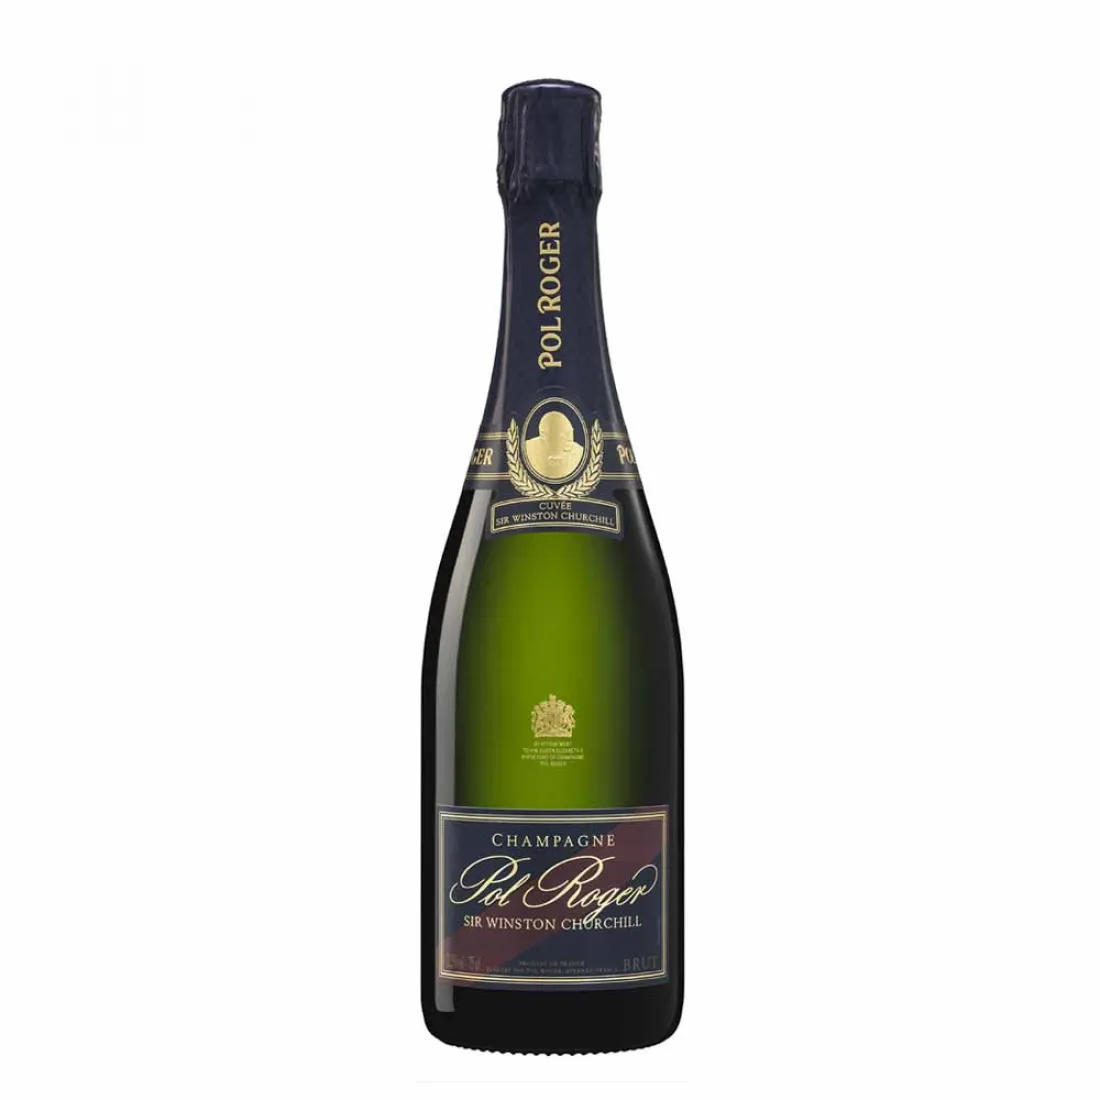 Expensive Pol Roger Cuvée Sir Winston Churchill Champagne